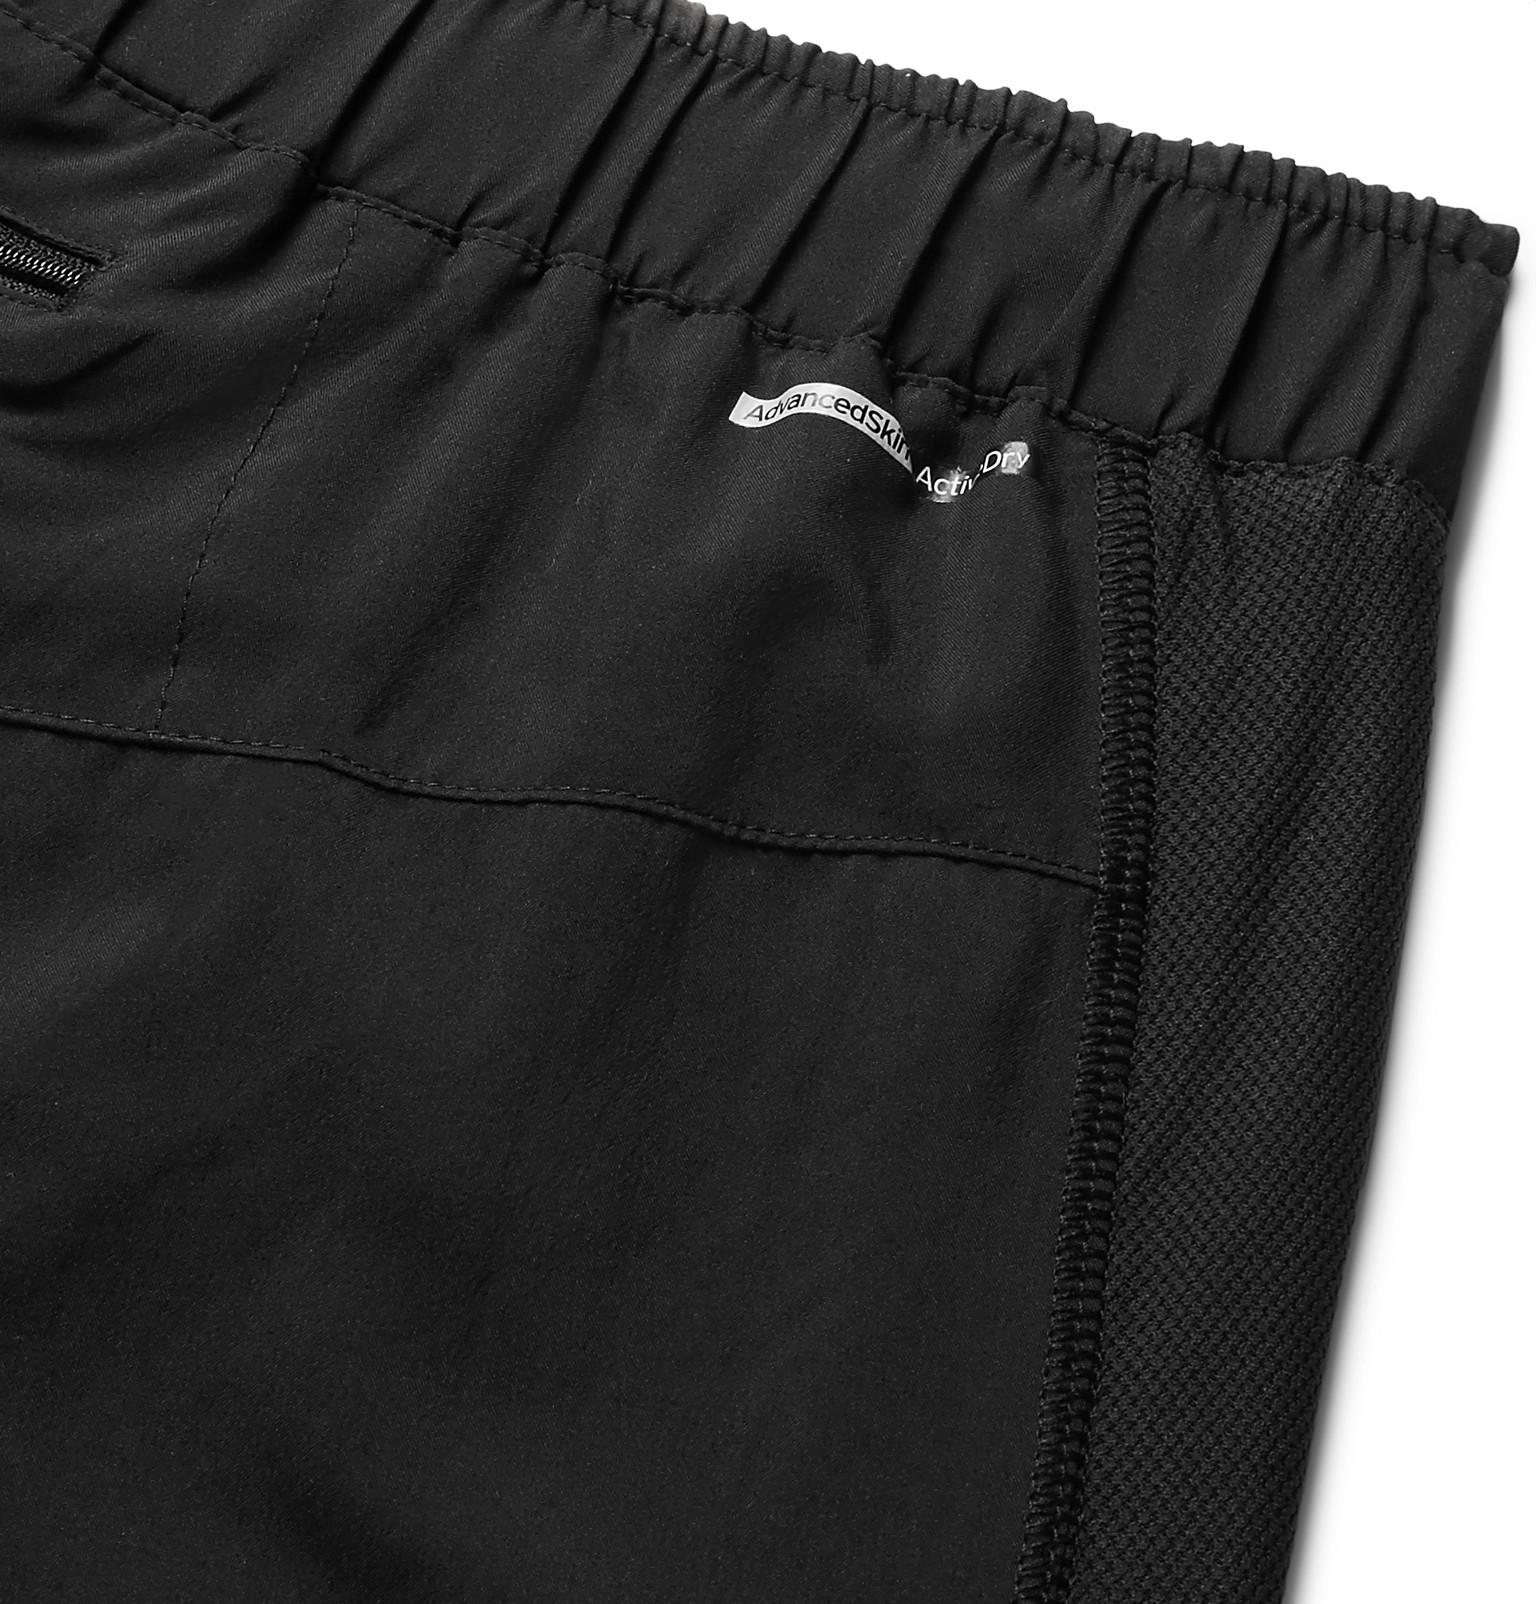 Salomon Advanced Skin Active Dry Shorts Online Sale, UP TO 50% OFF